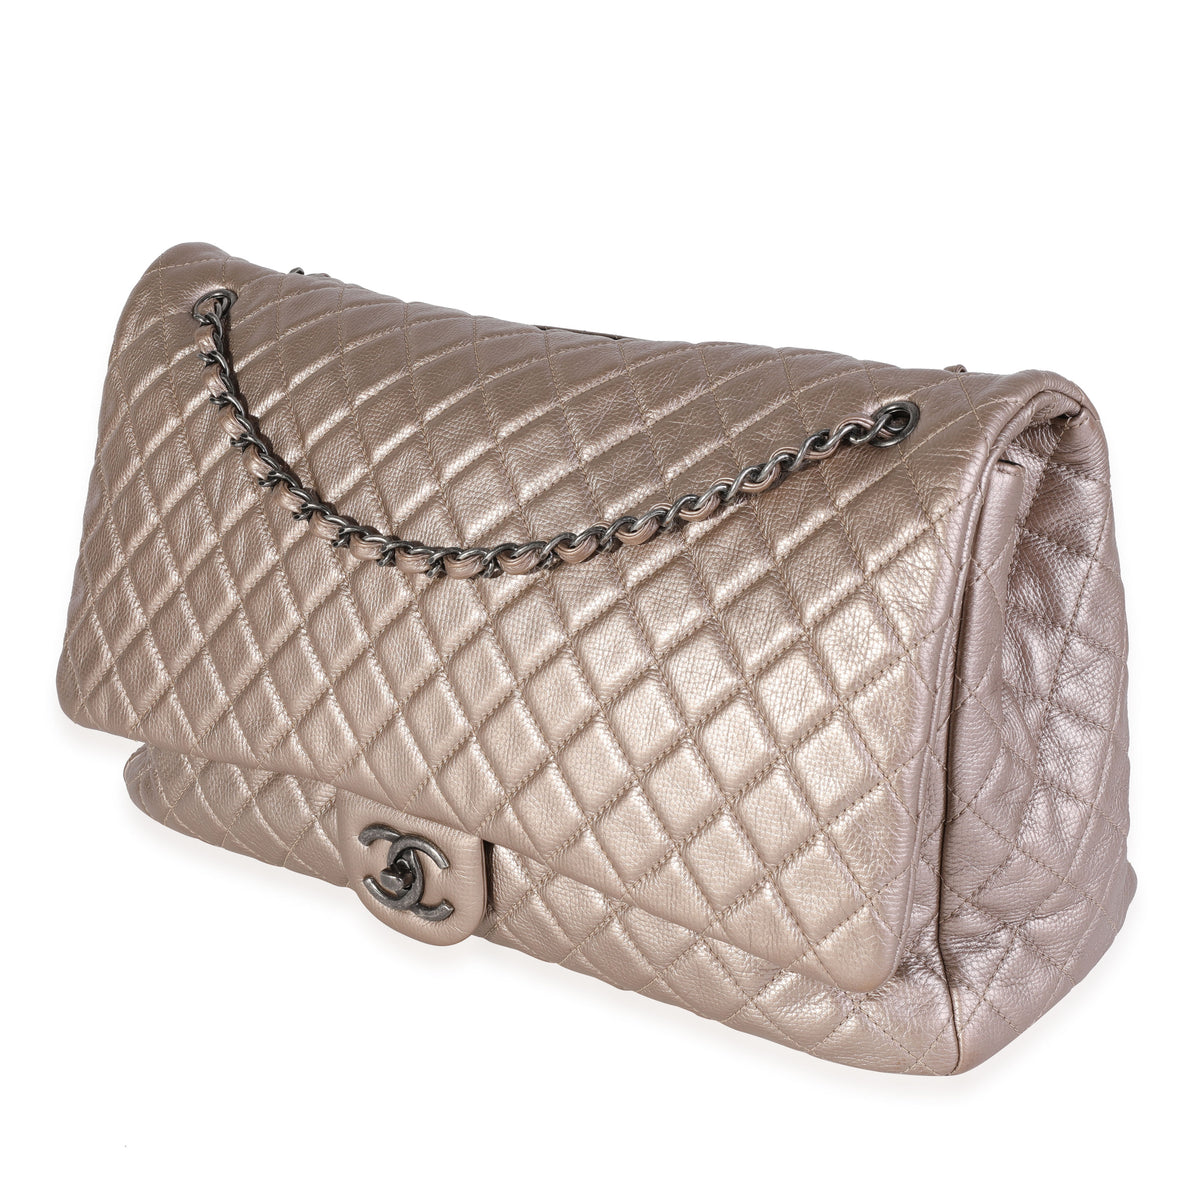 CHANEL, Bags, Chanel Xxl Flap Bag Metallic Calfskin Quilted Airline  Travel Bag In Silver